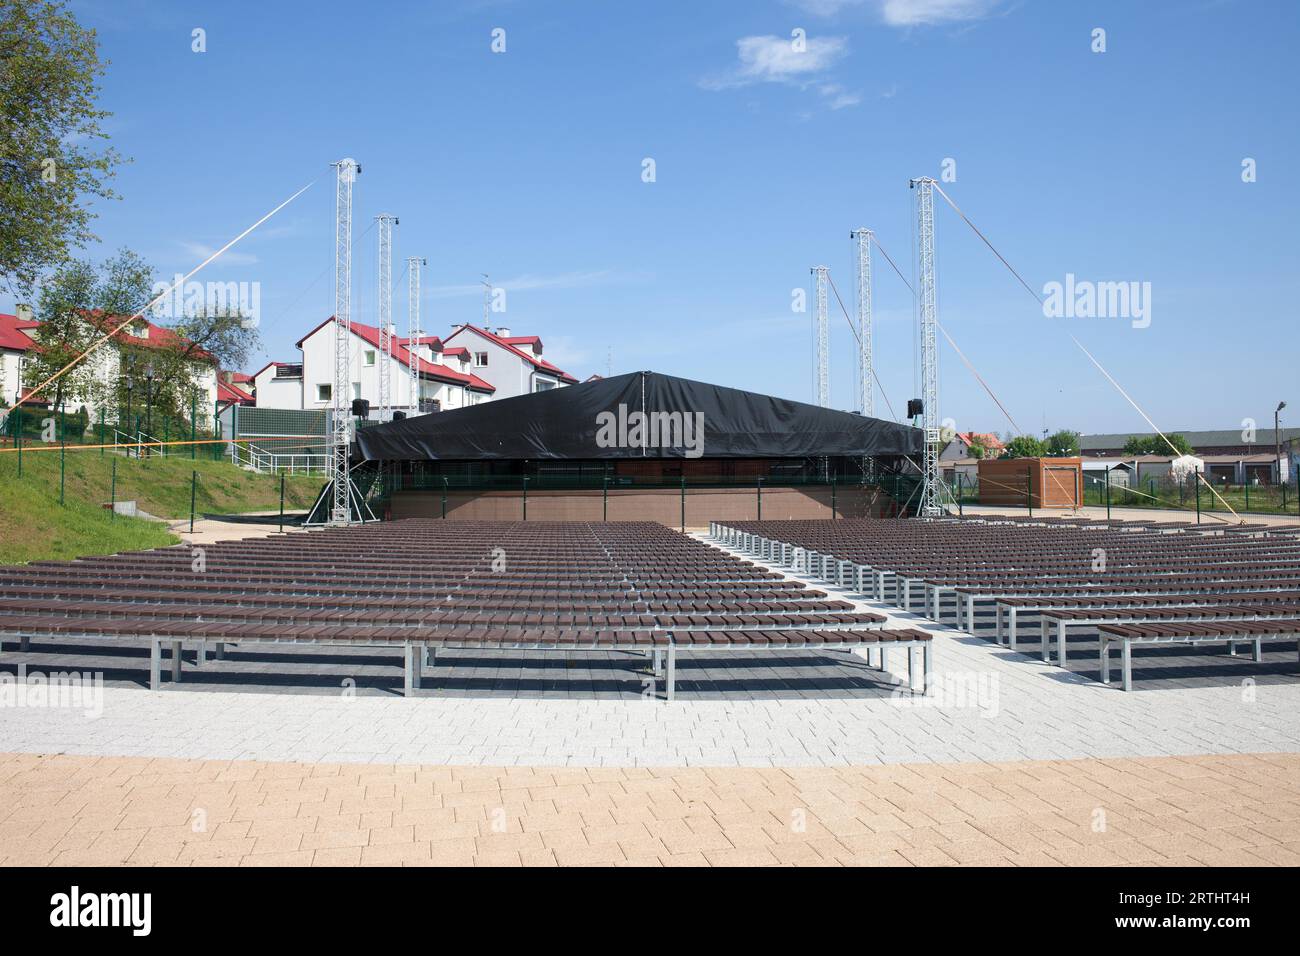 Resort town of Wladyslawowo in Poland, summer open-air concert municipal amphitheatre Stock Photo